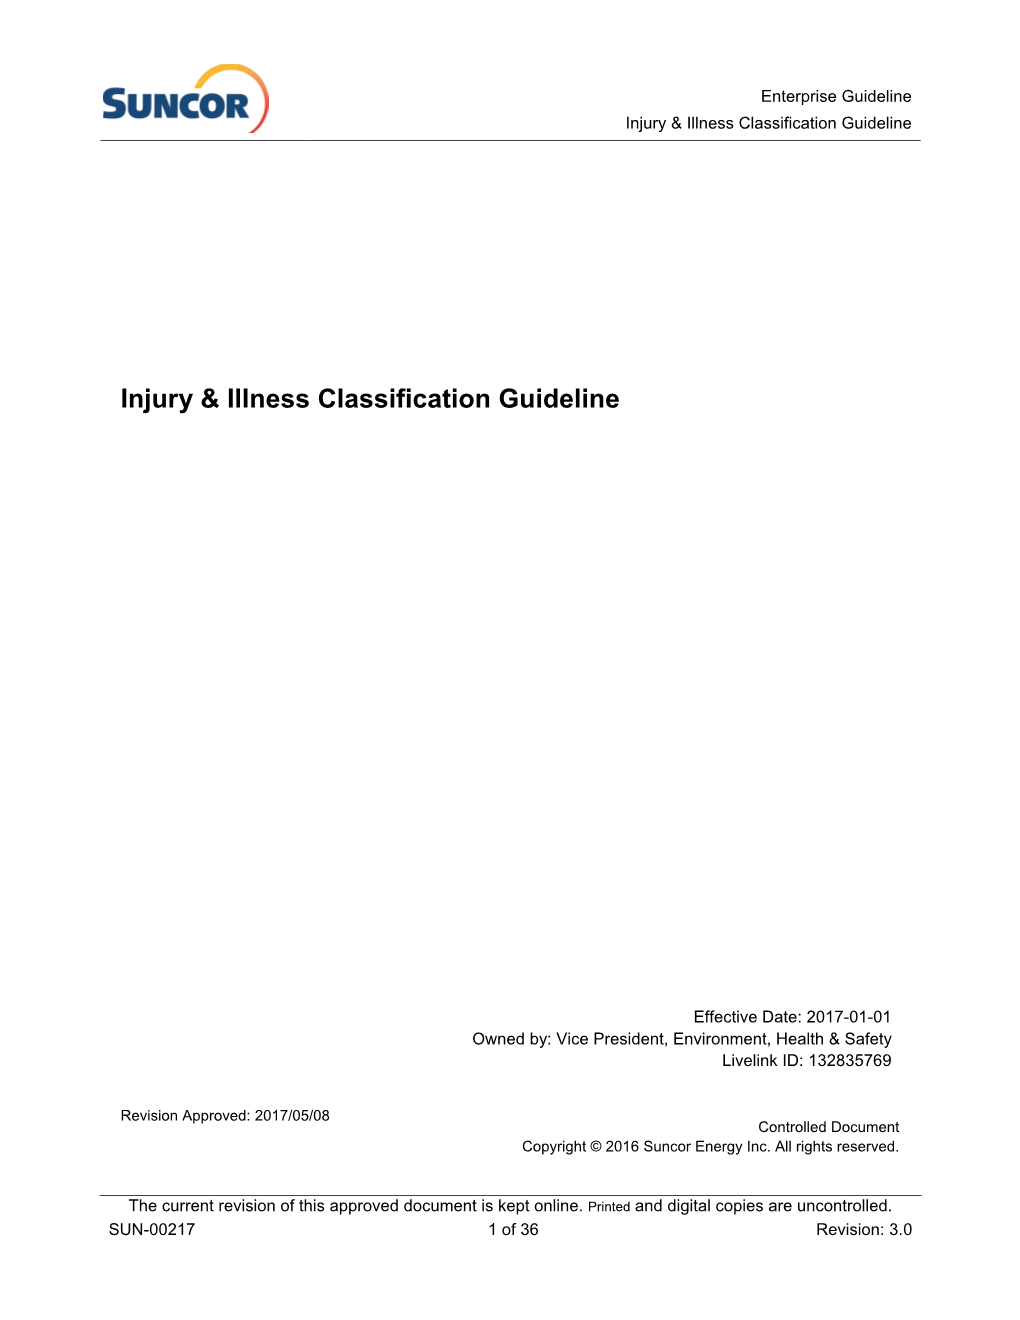 SUN-00217 1 of 36 Revision: 3.0 Enterprise Guideline Injury & Illness Classification Guideline